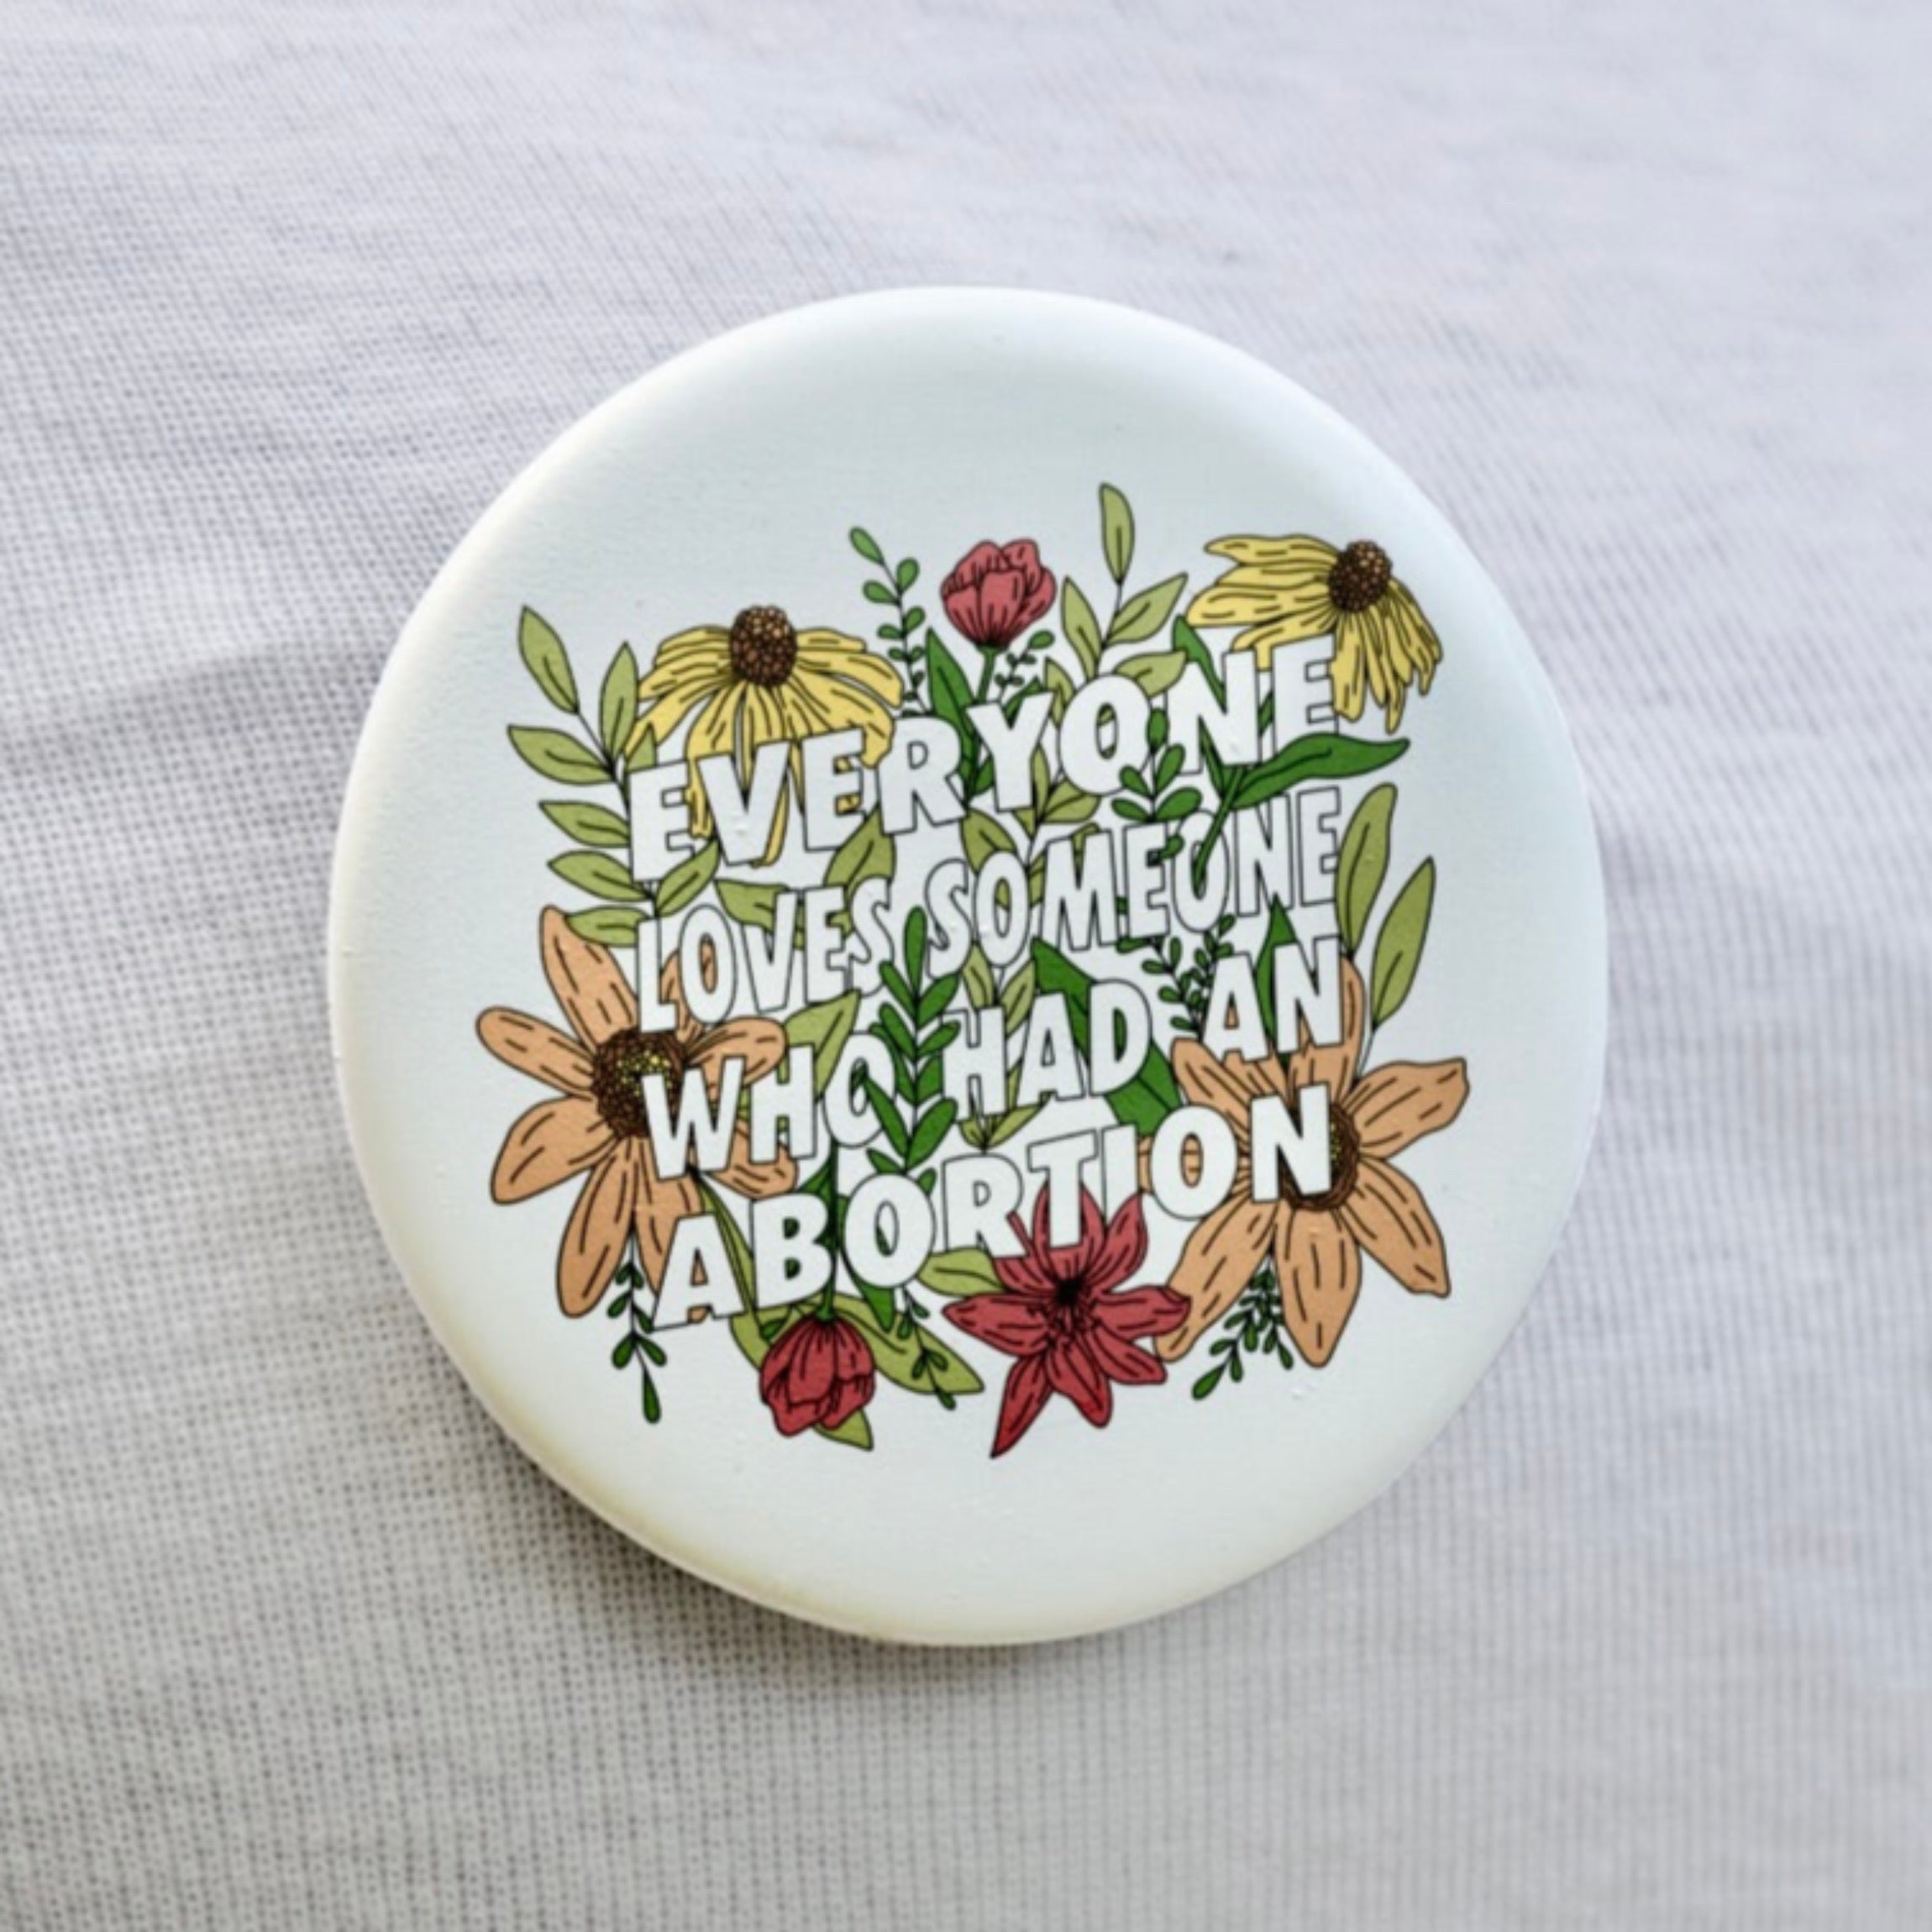 Everyone Loves Someone Who Had An Abortion Button